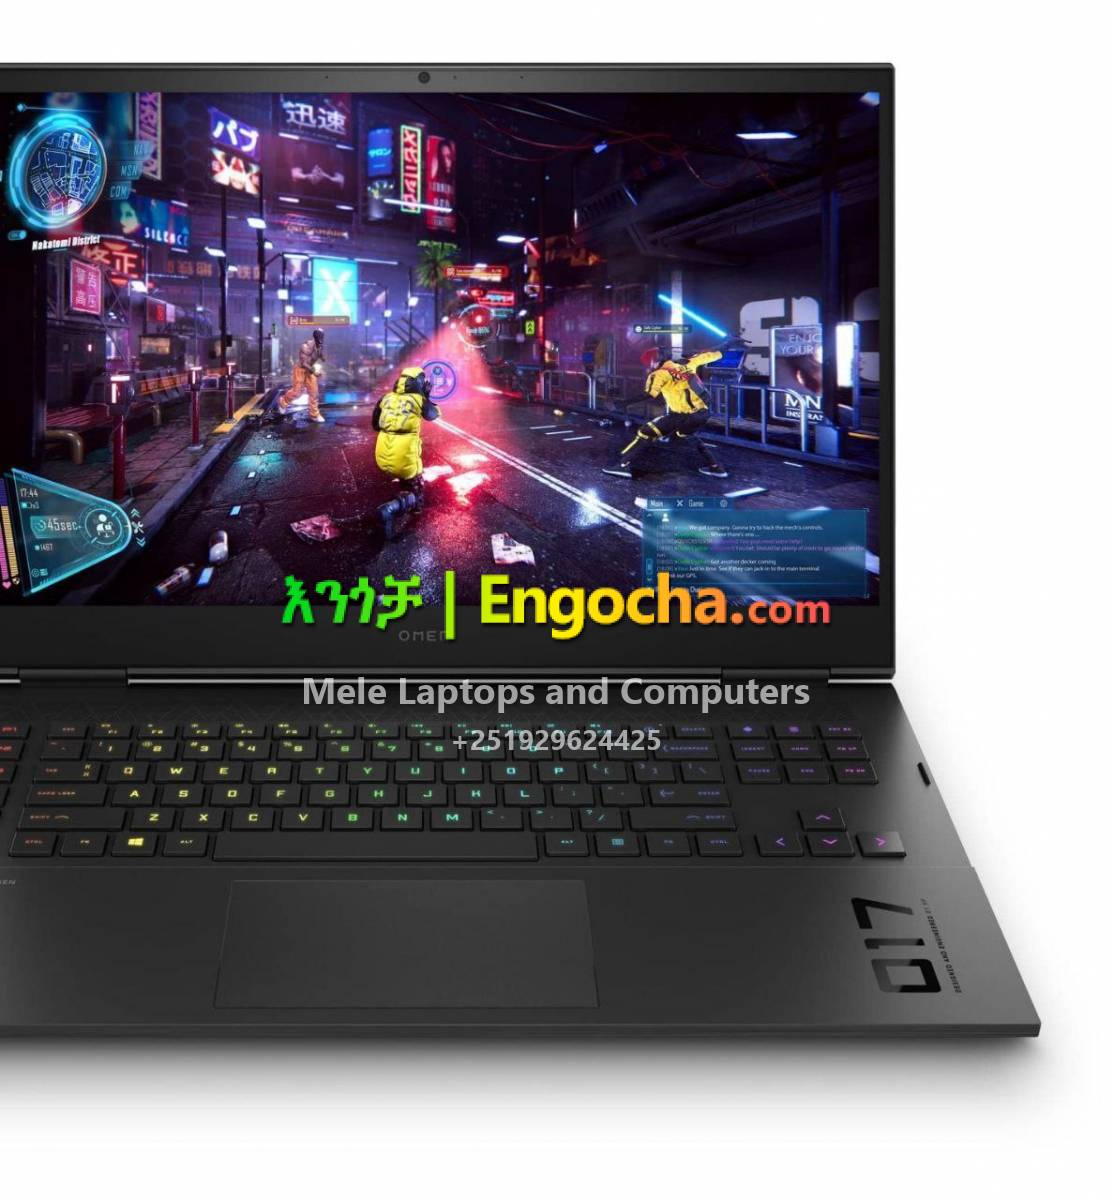 New Hp omen 17 Gaming laptop for sale & price in Ethiopia - Engocha.com |  Buy New Hp omen 17 Gaming laptop in Addis Ababa Ethiopia | Engocha.com